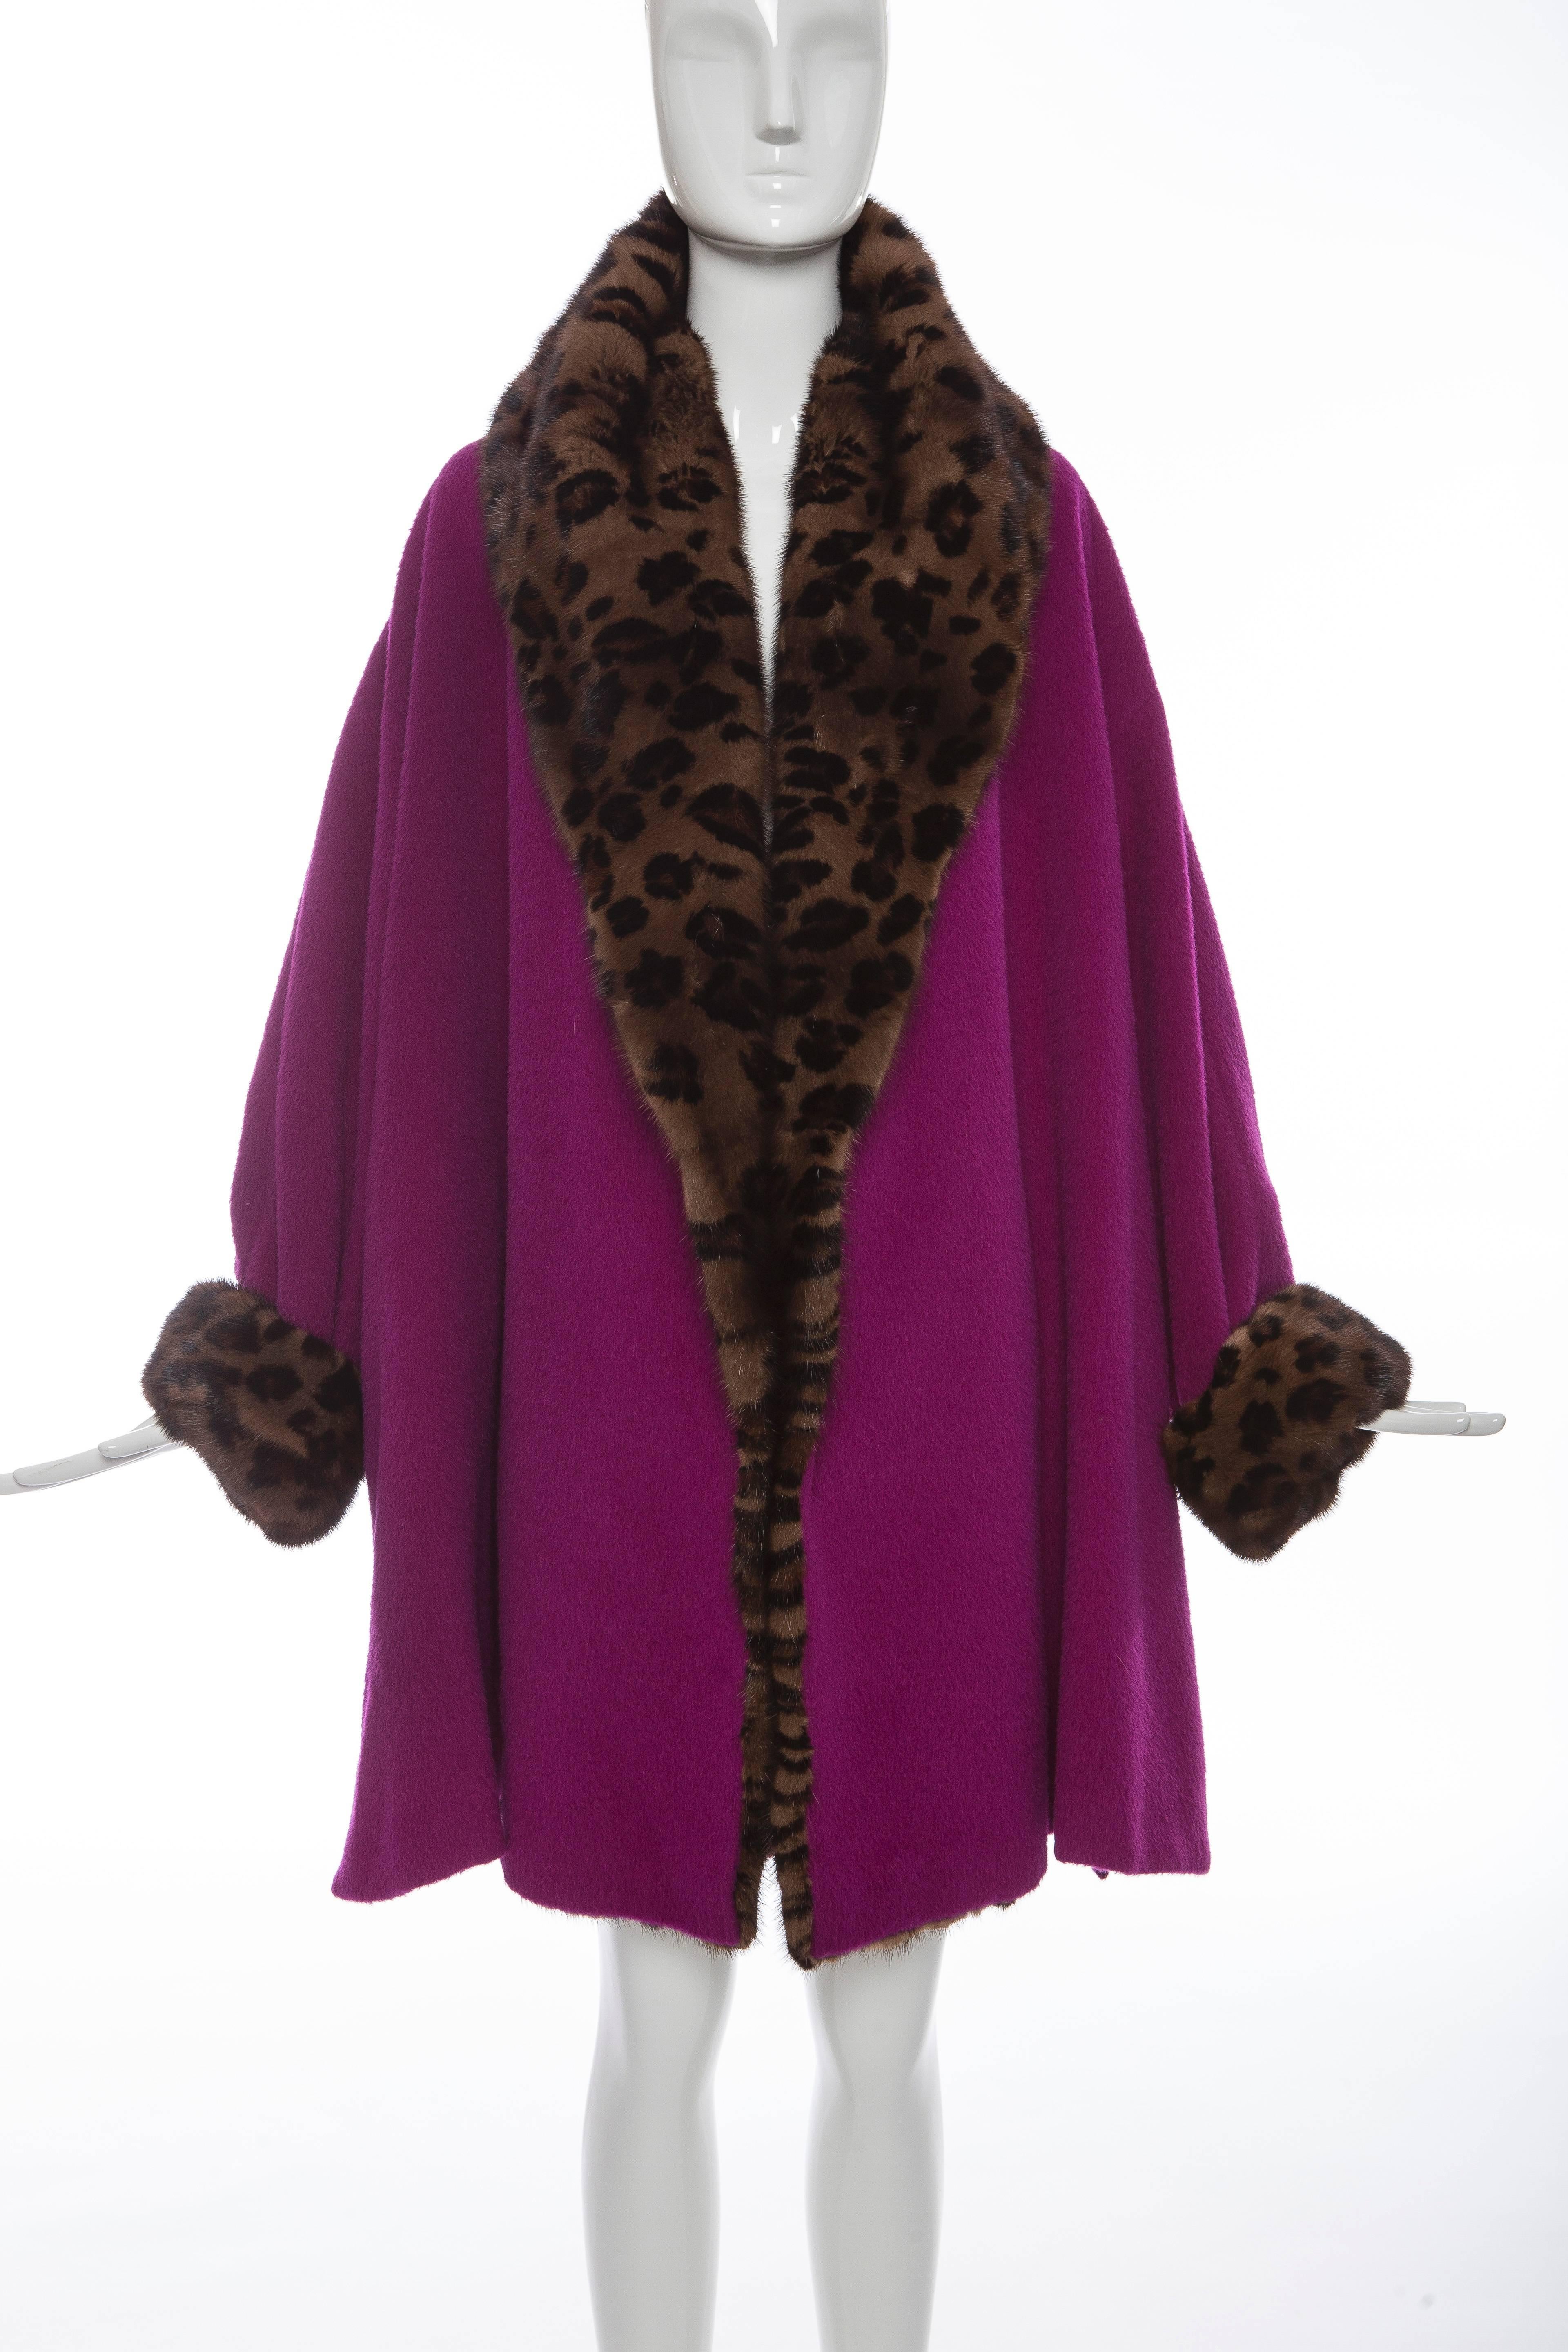  Gianni Versace for Jenny, Circa: 1980's wool swing coat with mink trim, two front pockets and lined in silk leopard.

US. 10

Bust: 76 inches, Length: 38 inches